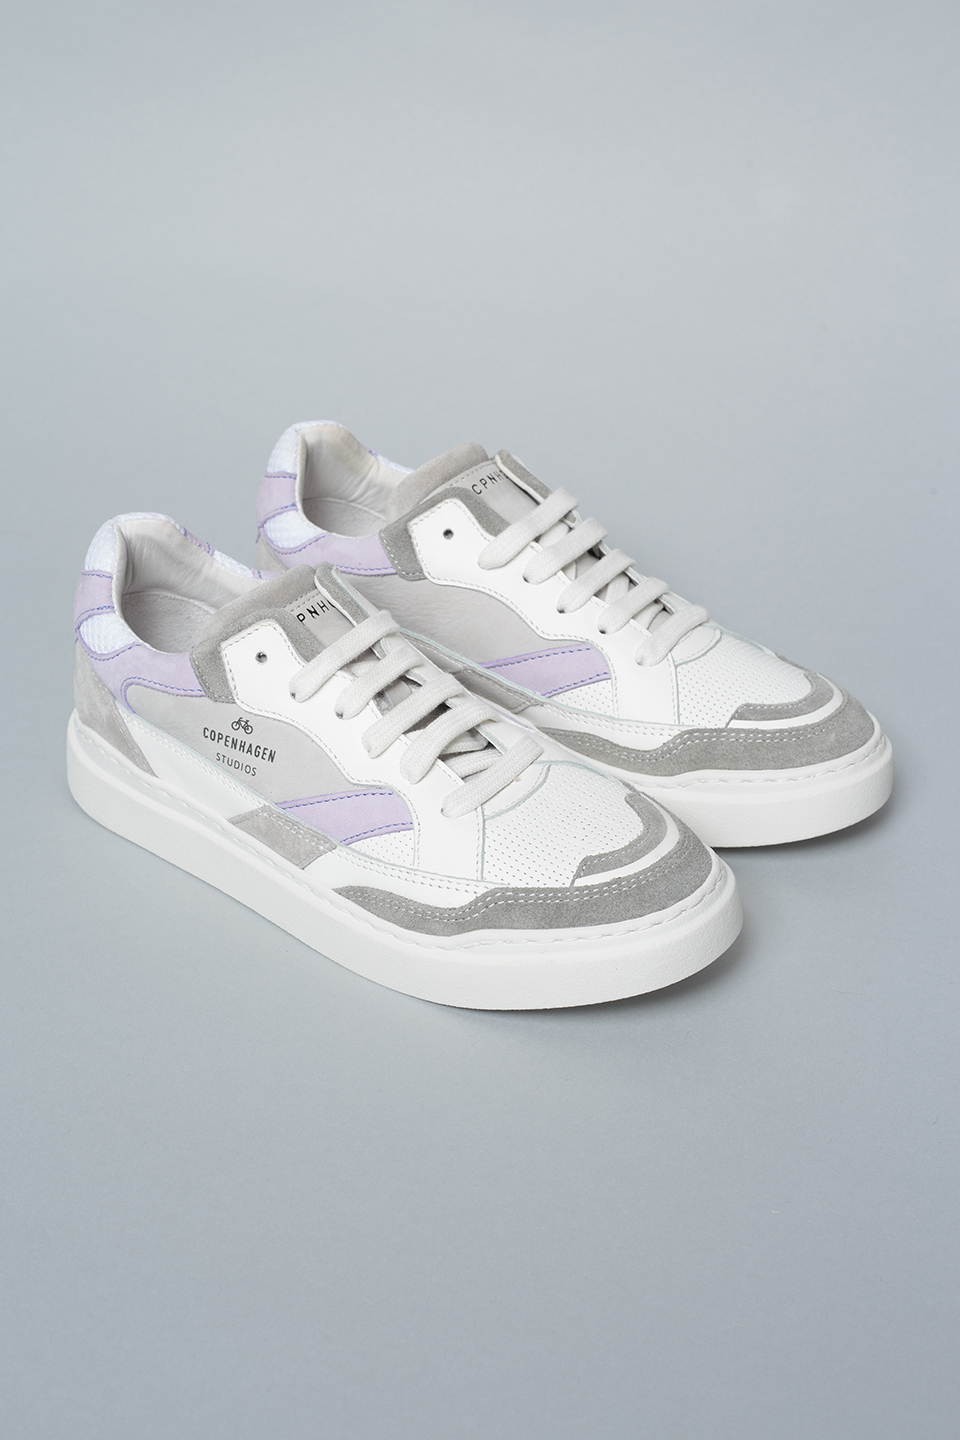 CPH560 material mix white/lavender